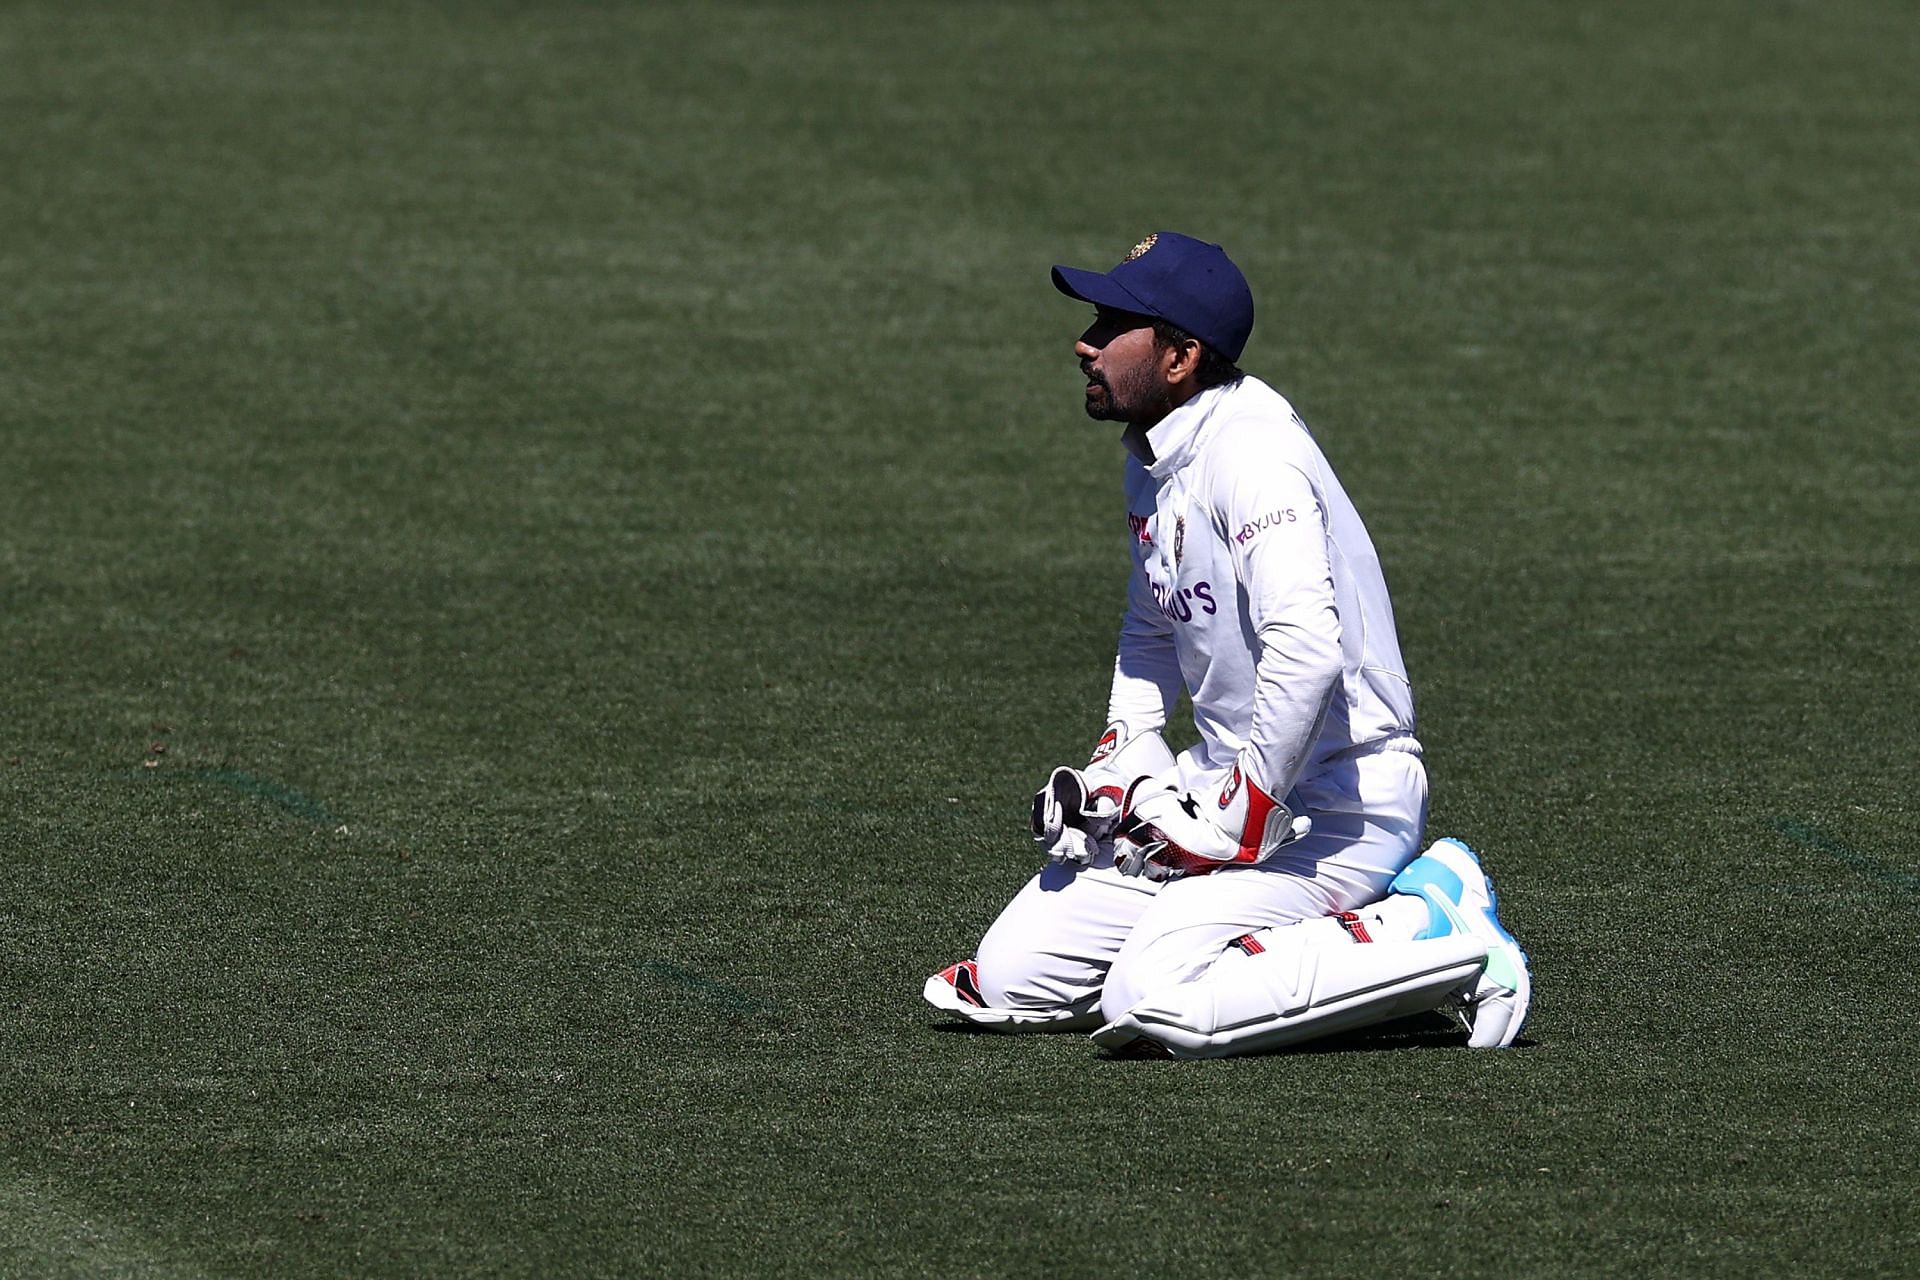 Wriddhiman Saha has played 40 Tests with his last outing coming against New Zealand last December